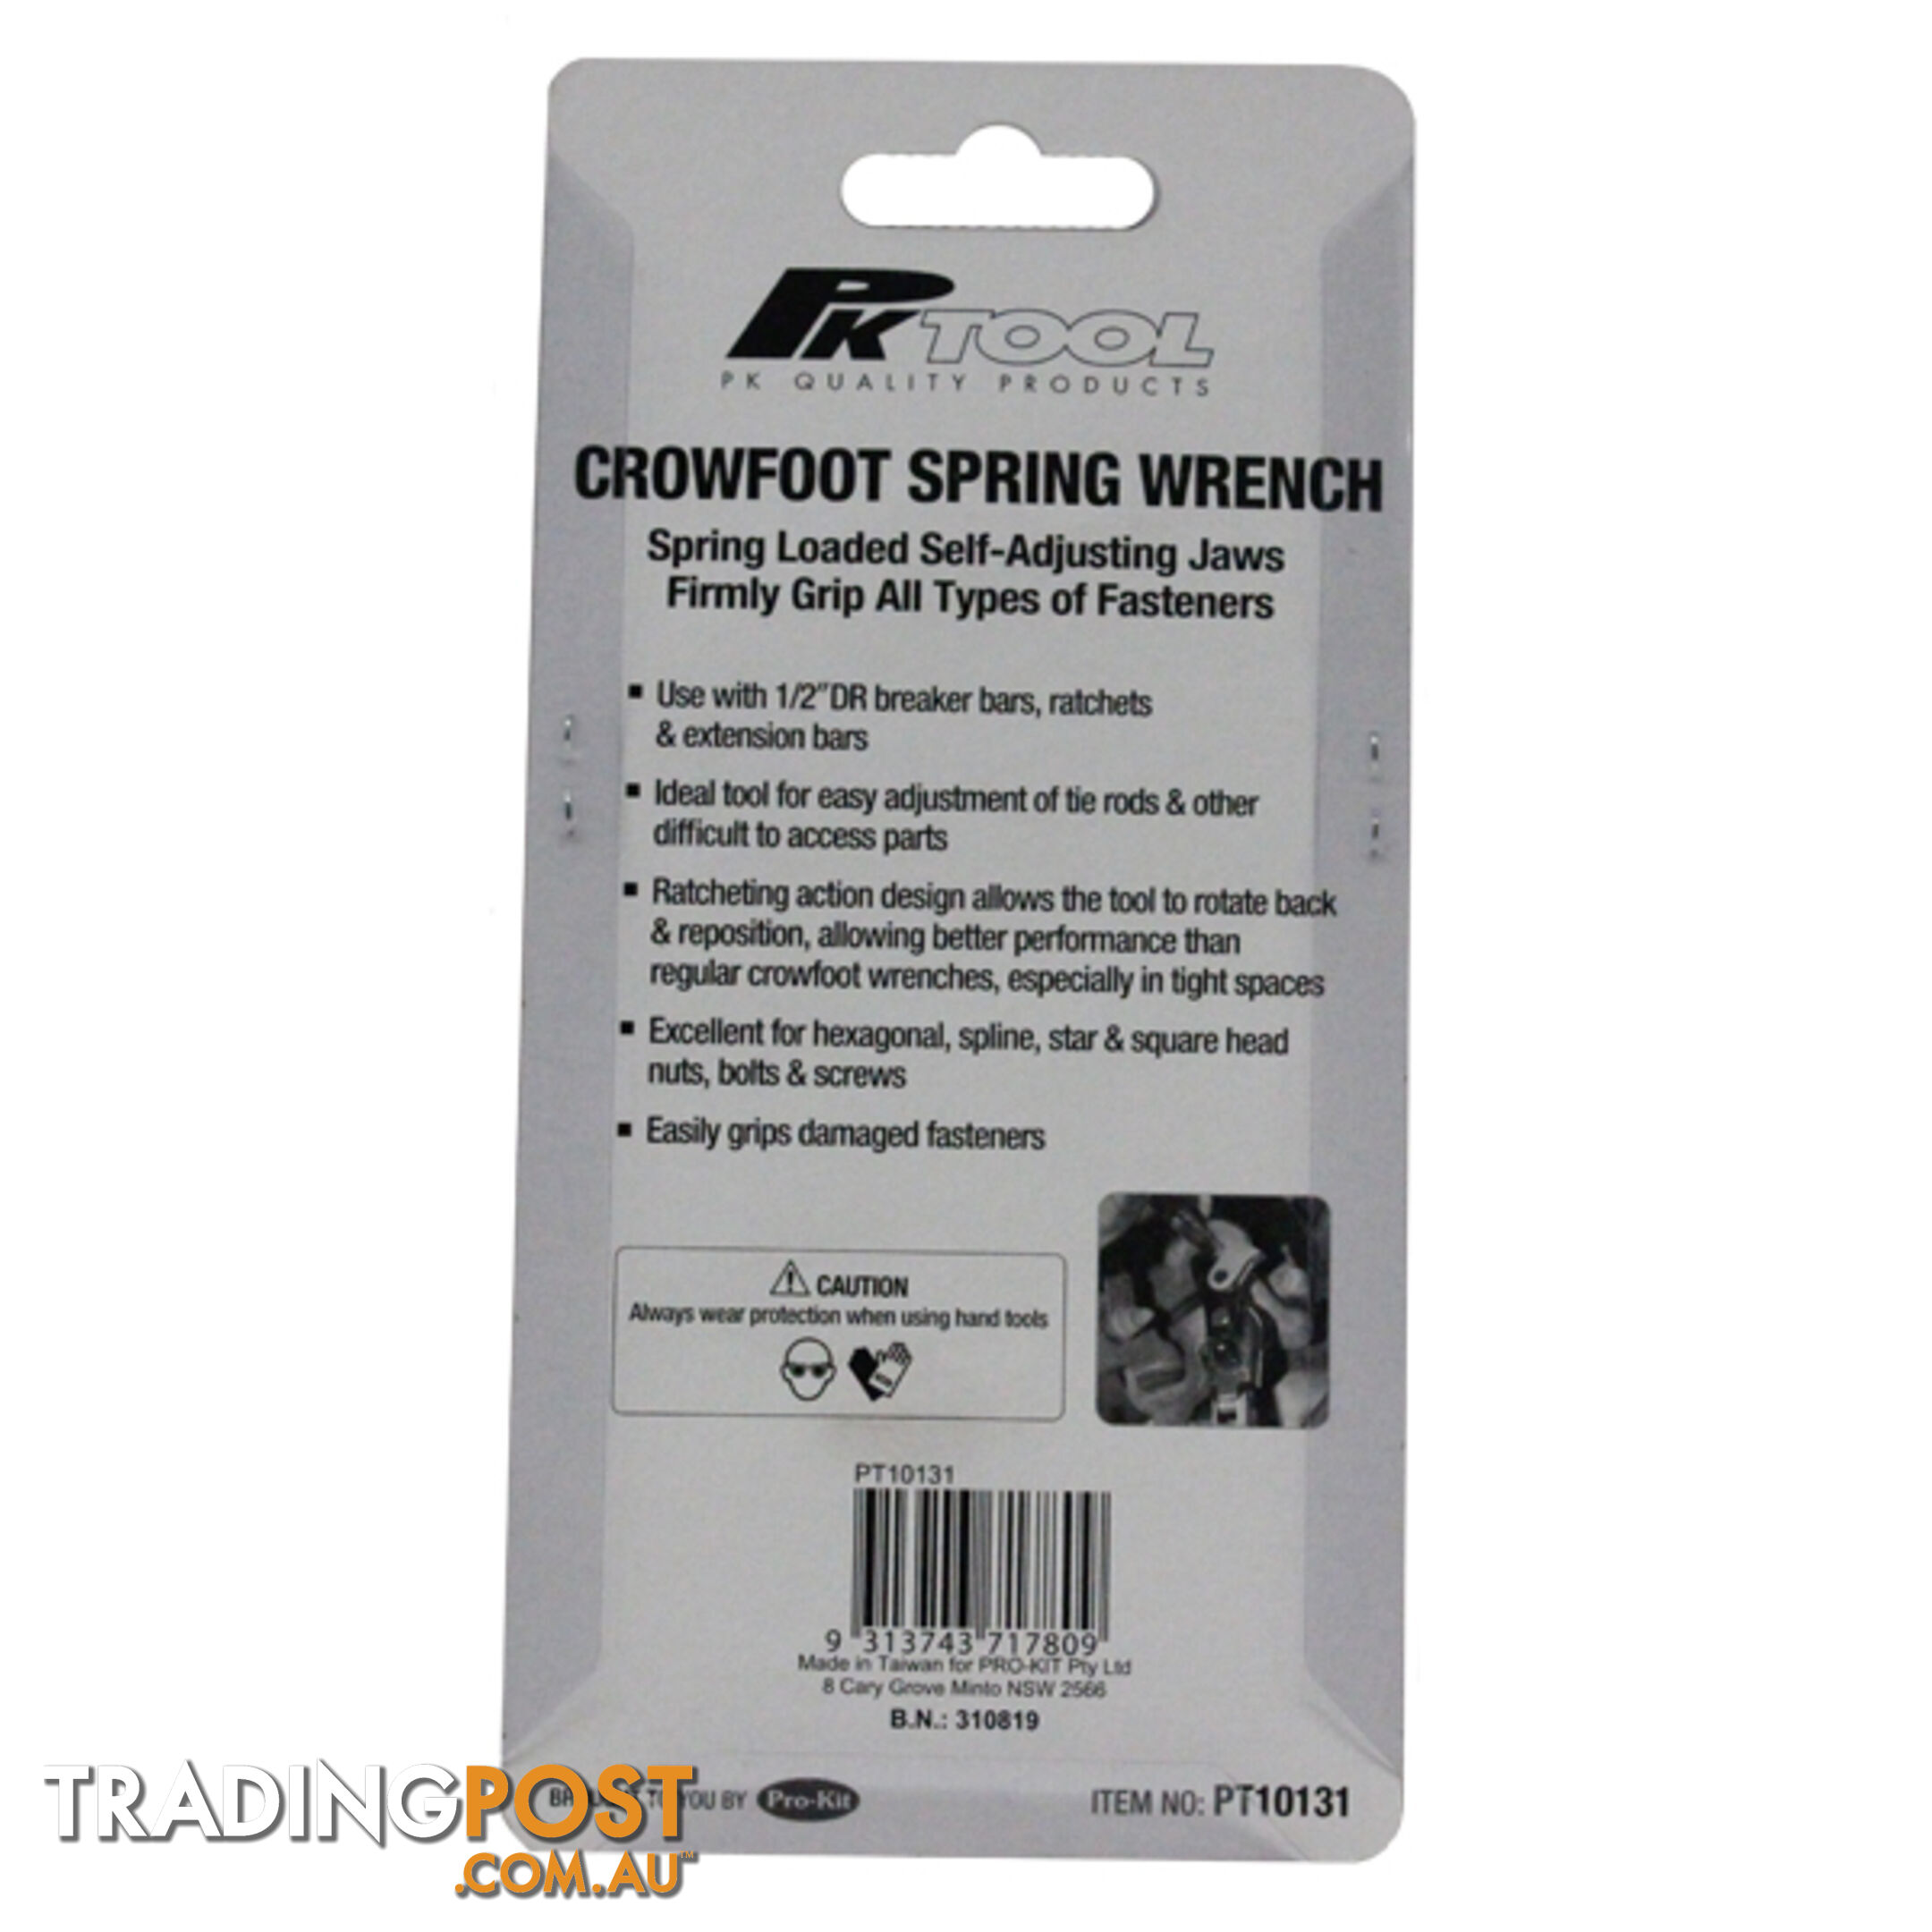 Crowfoot Spring Wrench 1/2 "dr  14.3mm  - 31.75mm SKU - PT10131